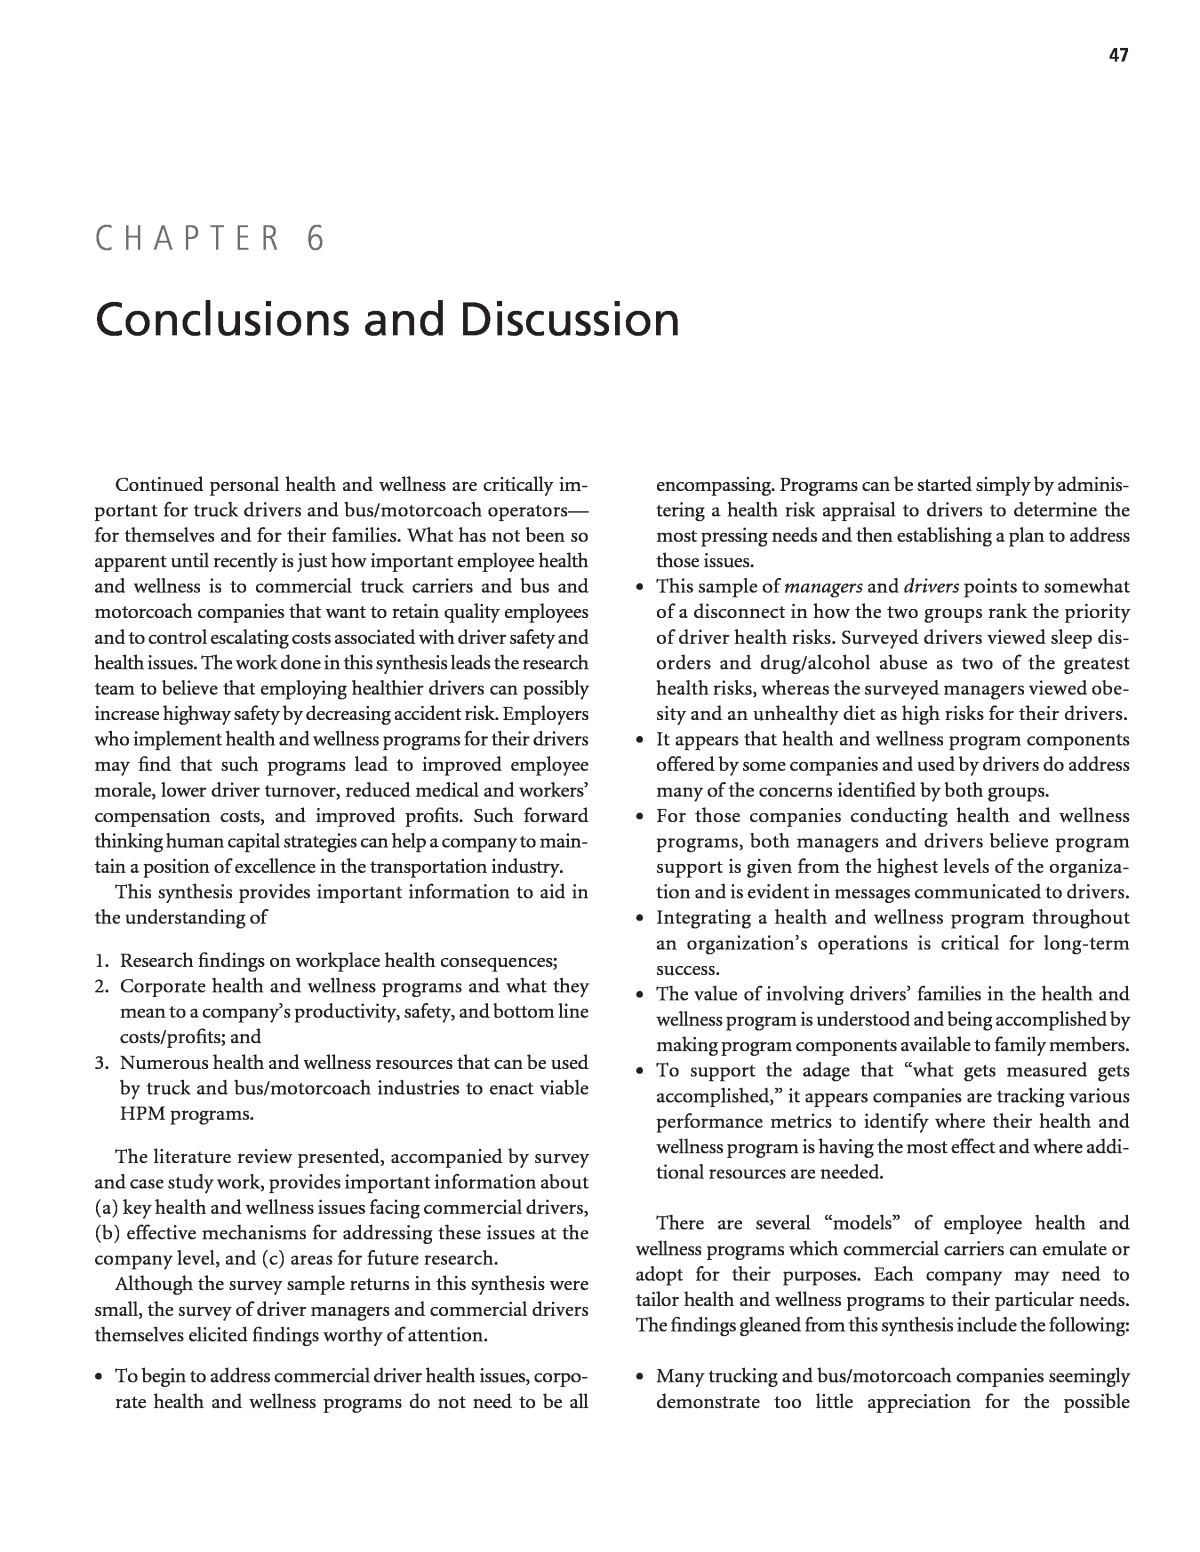 discussion in a research report